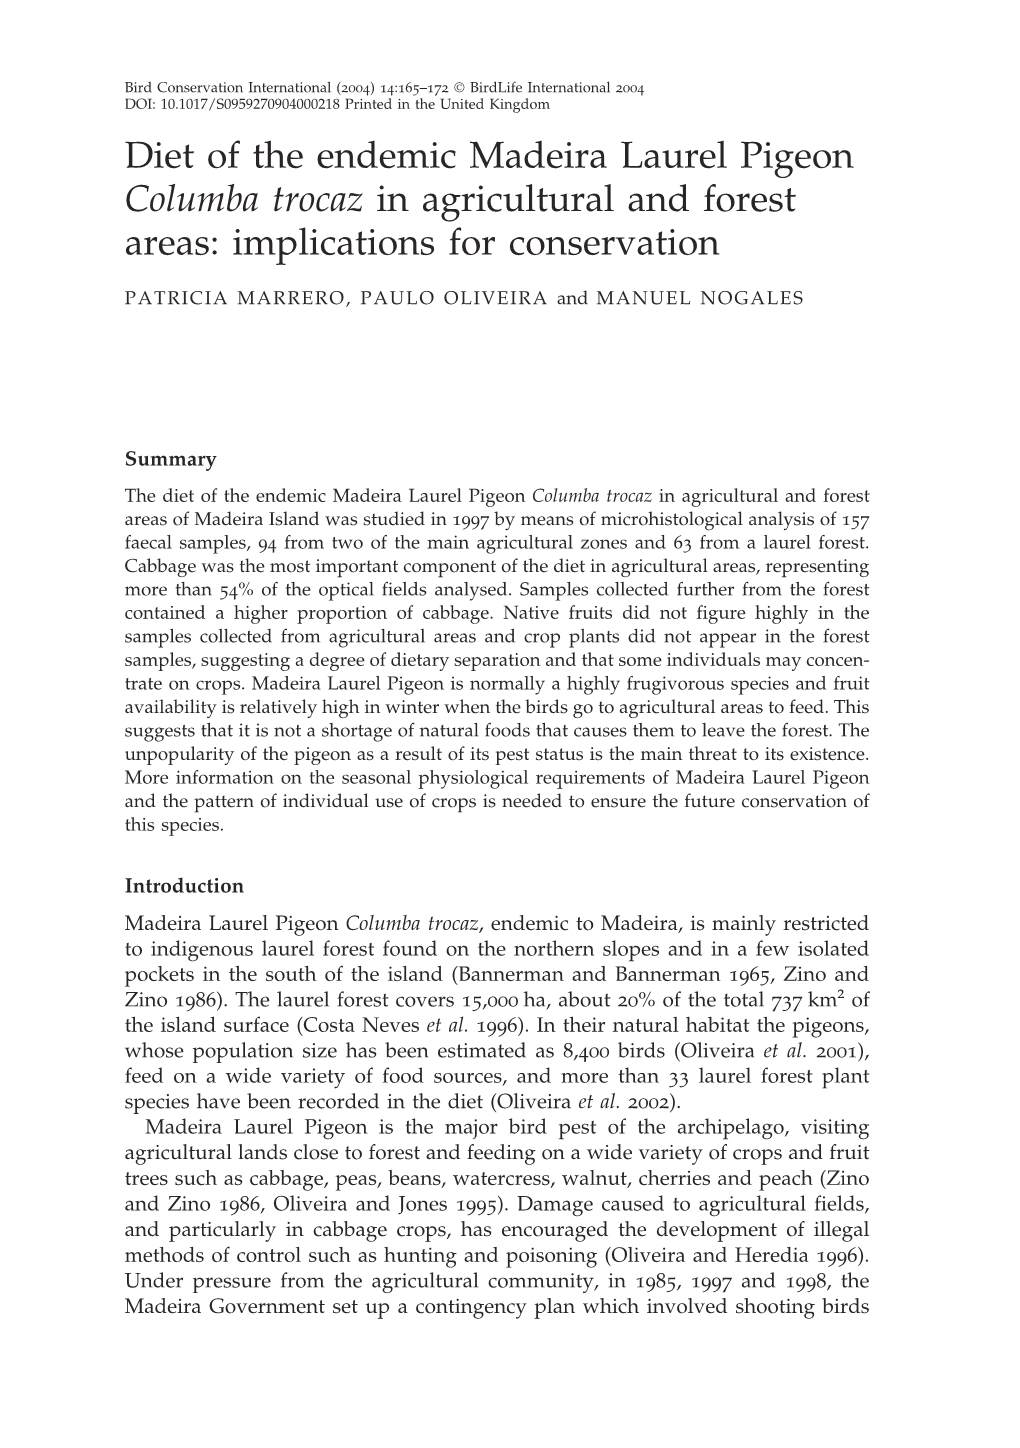 Diet of the Endemic Madeira Laurel Pigeon Columba Trocaz in Agricultural and Forest Areas: Implications for Conservation